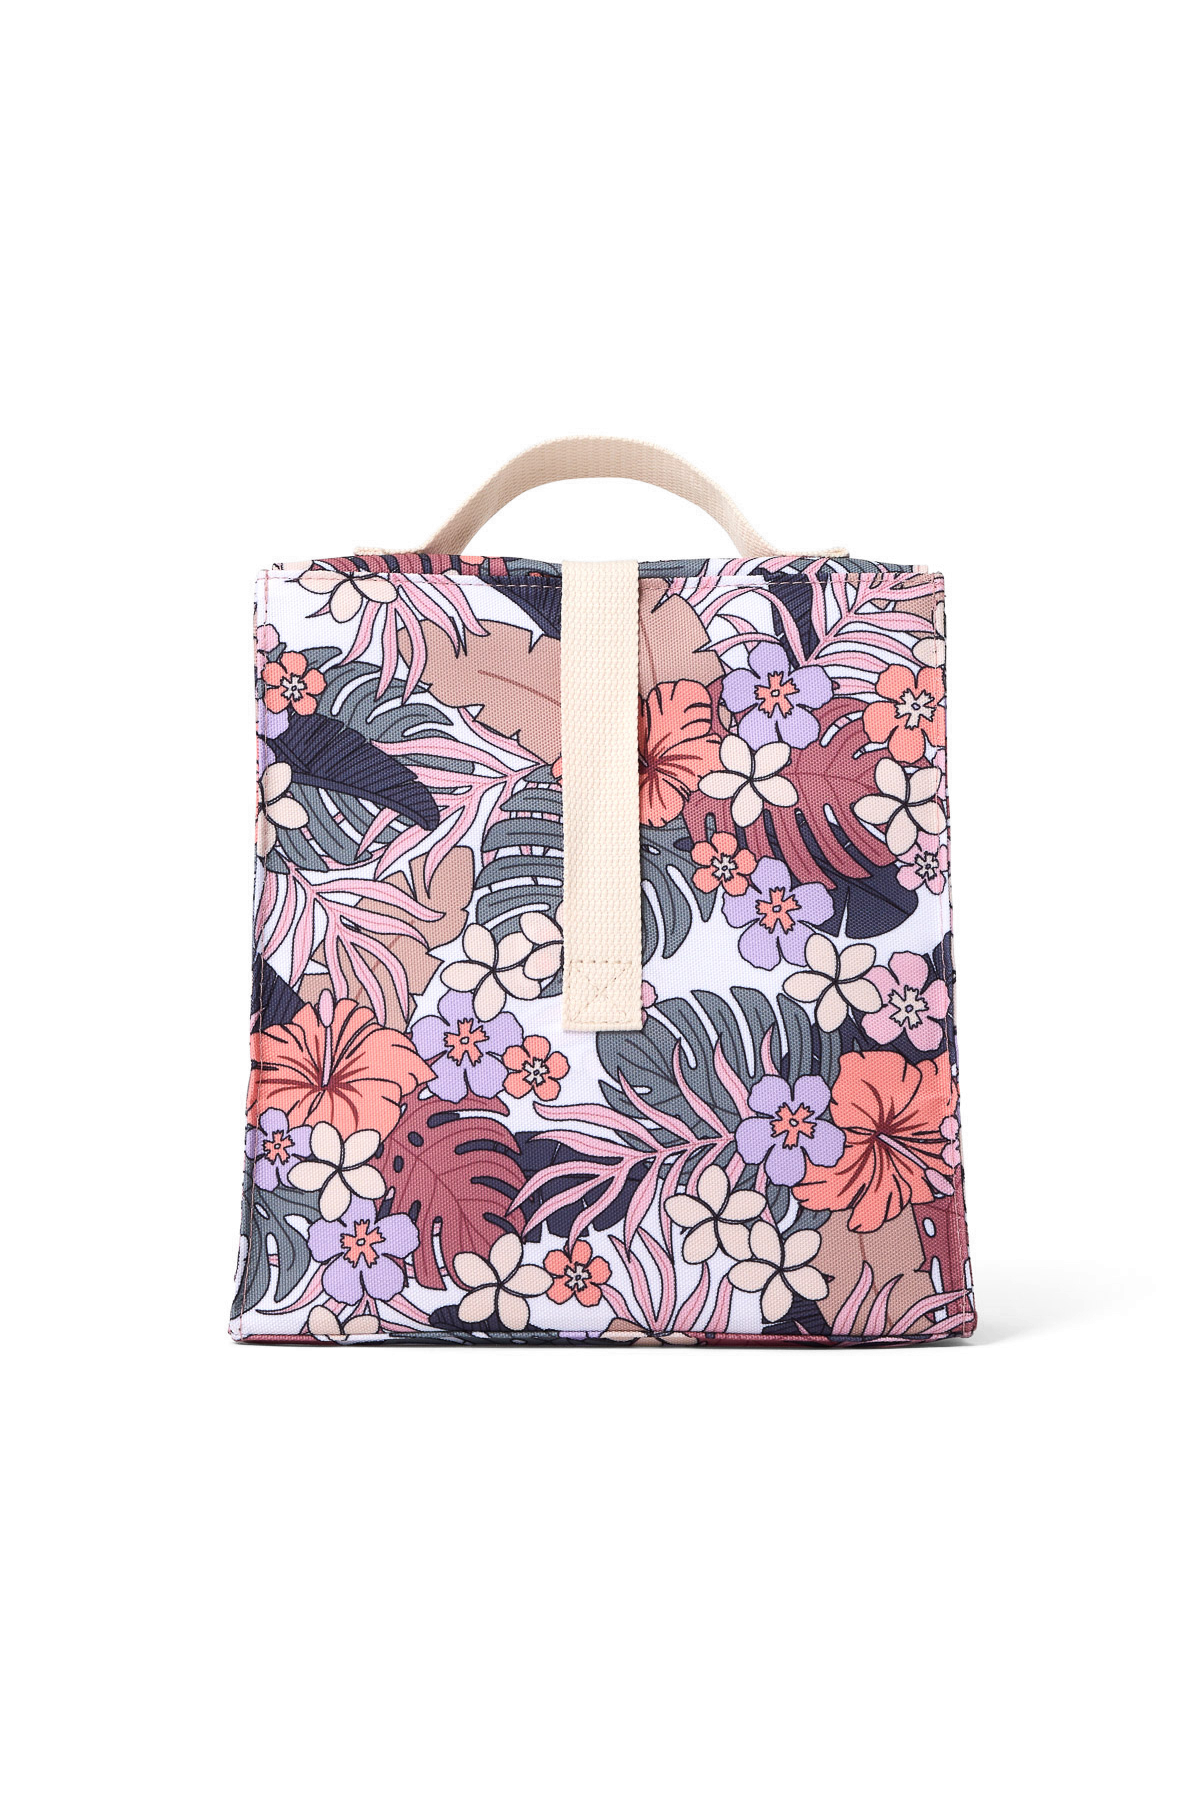 INSULATED LUNCH BAG Tropical Floral